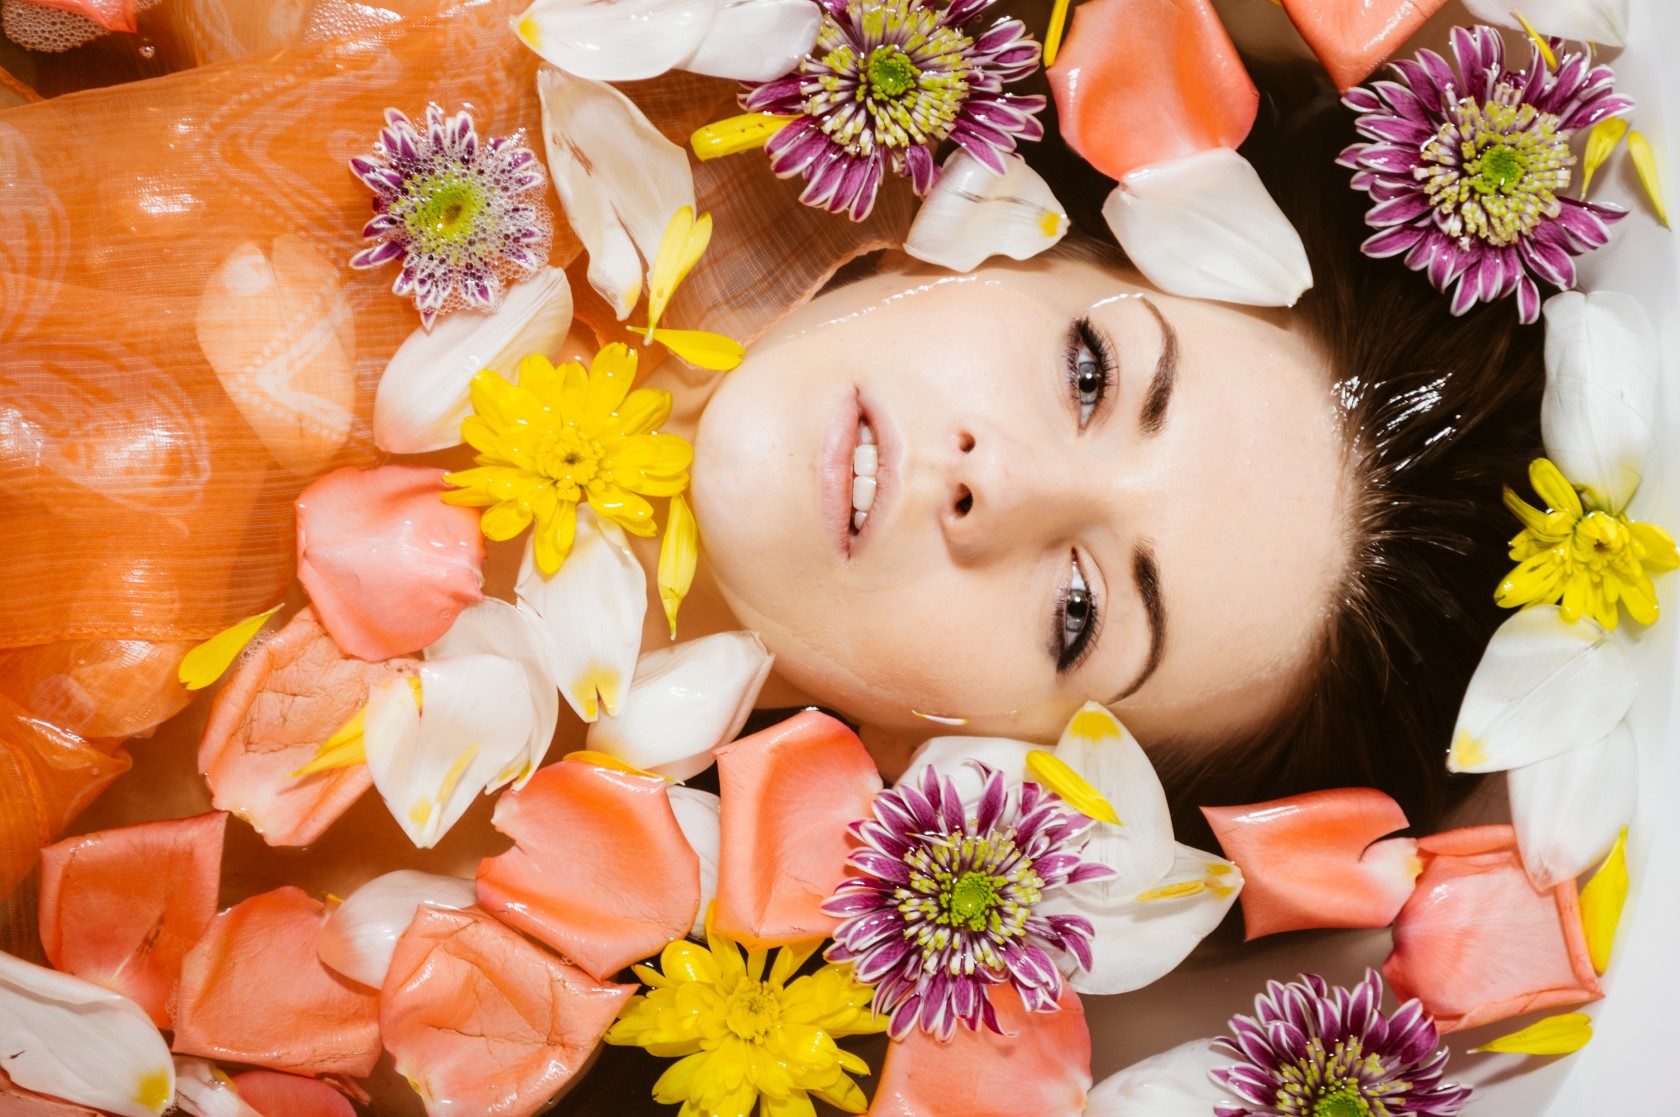 Taking an ayurvedic approach to acne.